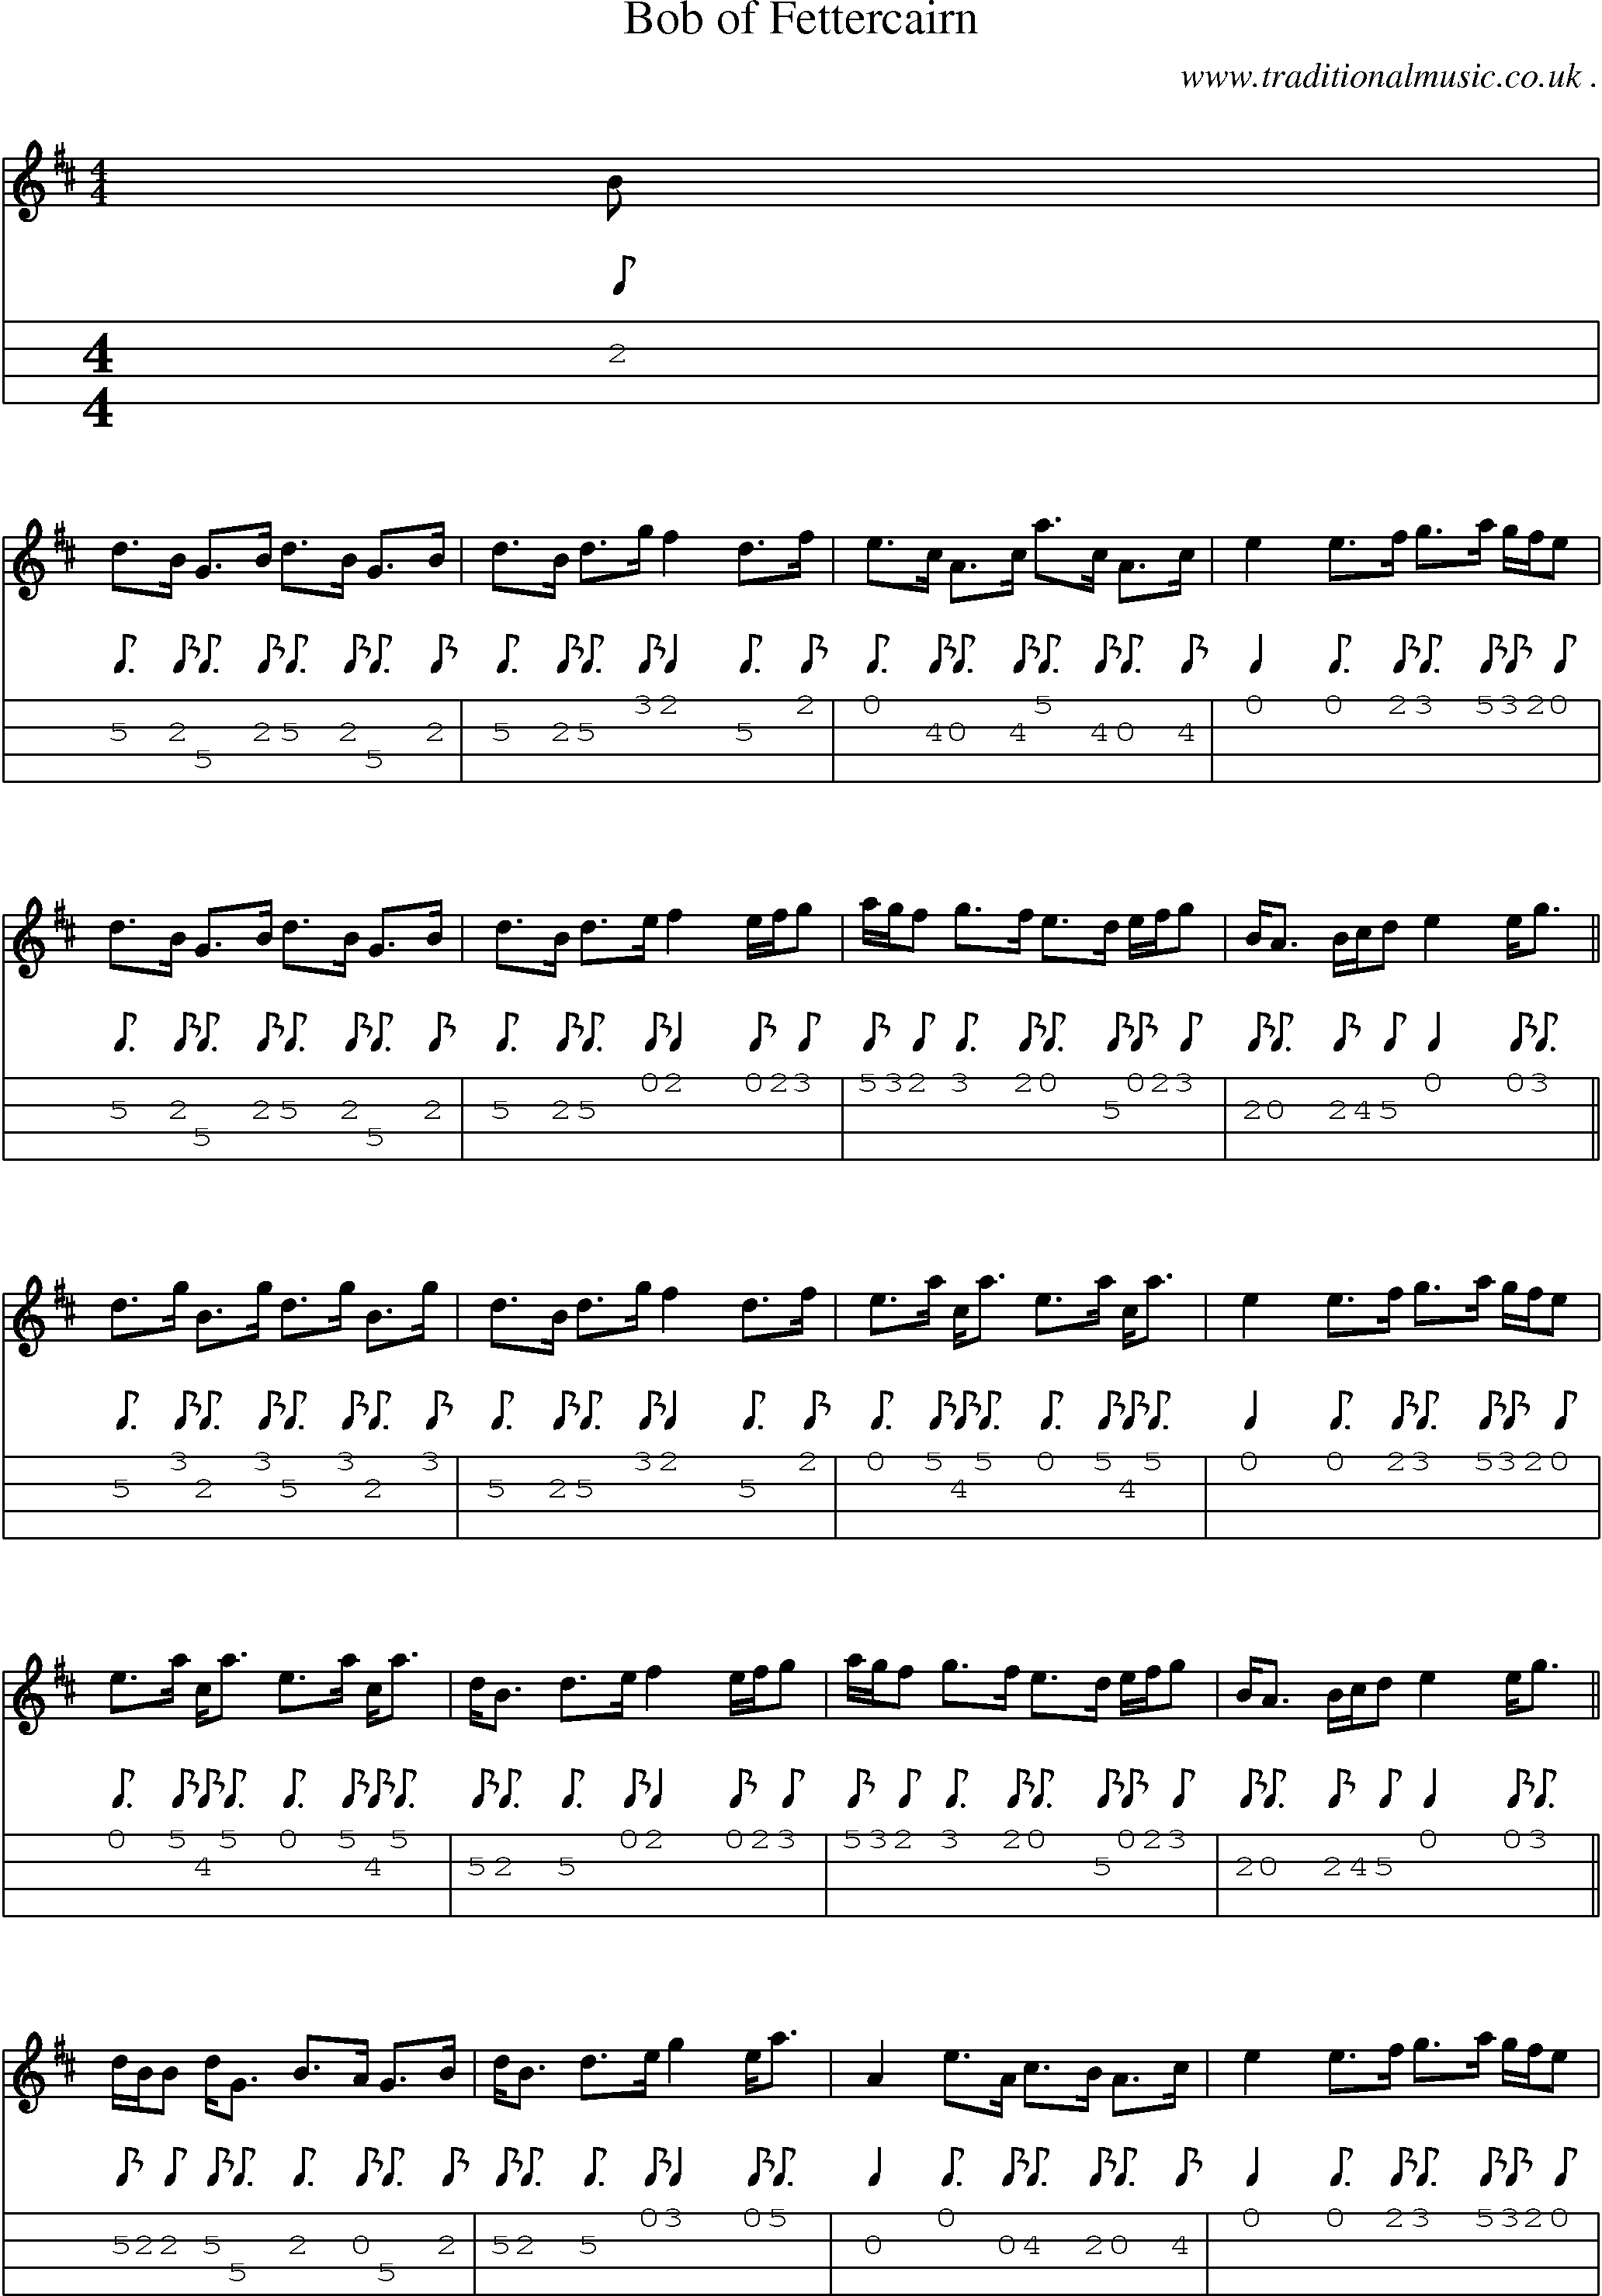 Sheet-music  score, Chords and Mandolin Tabs for Bob Of Fettercairn